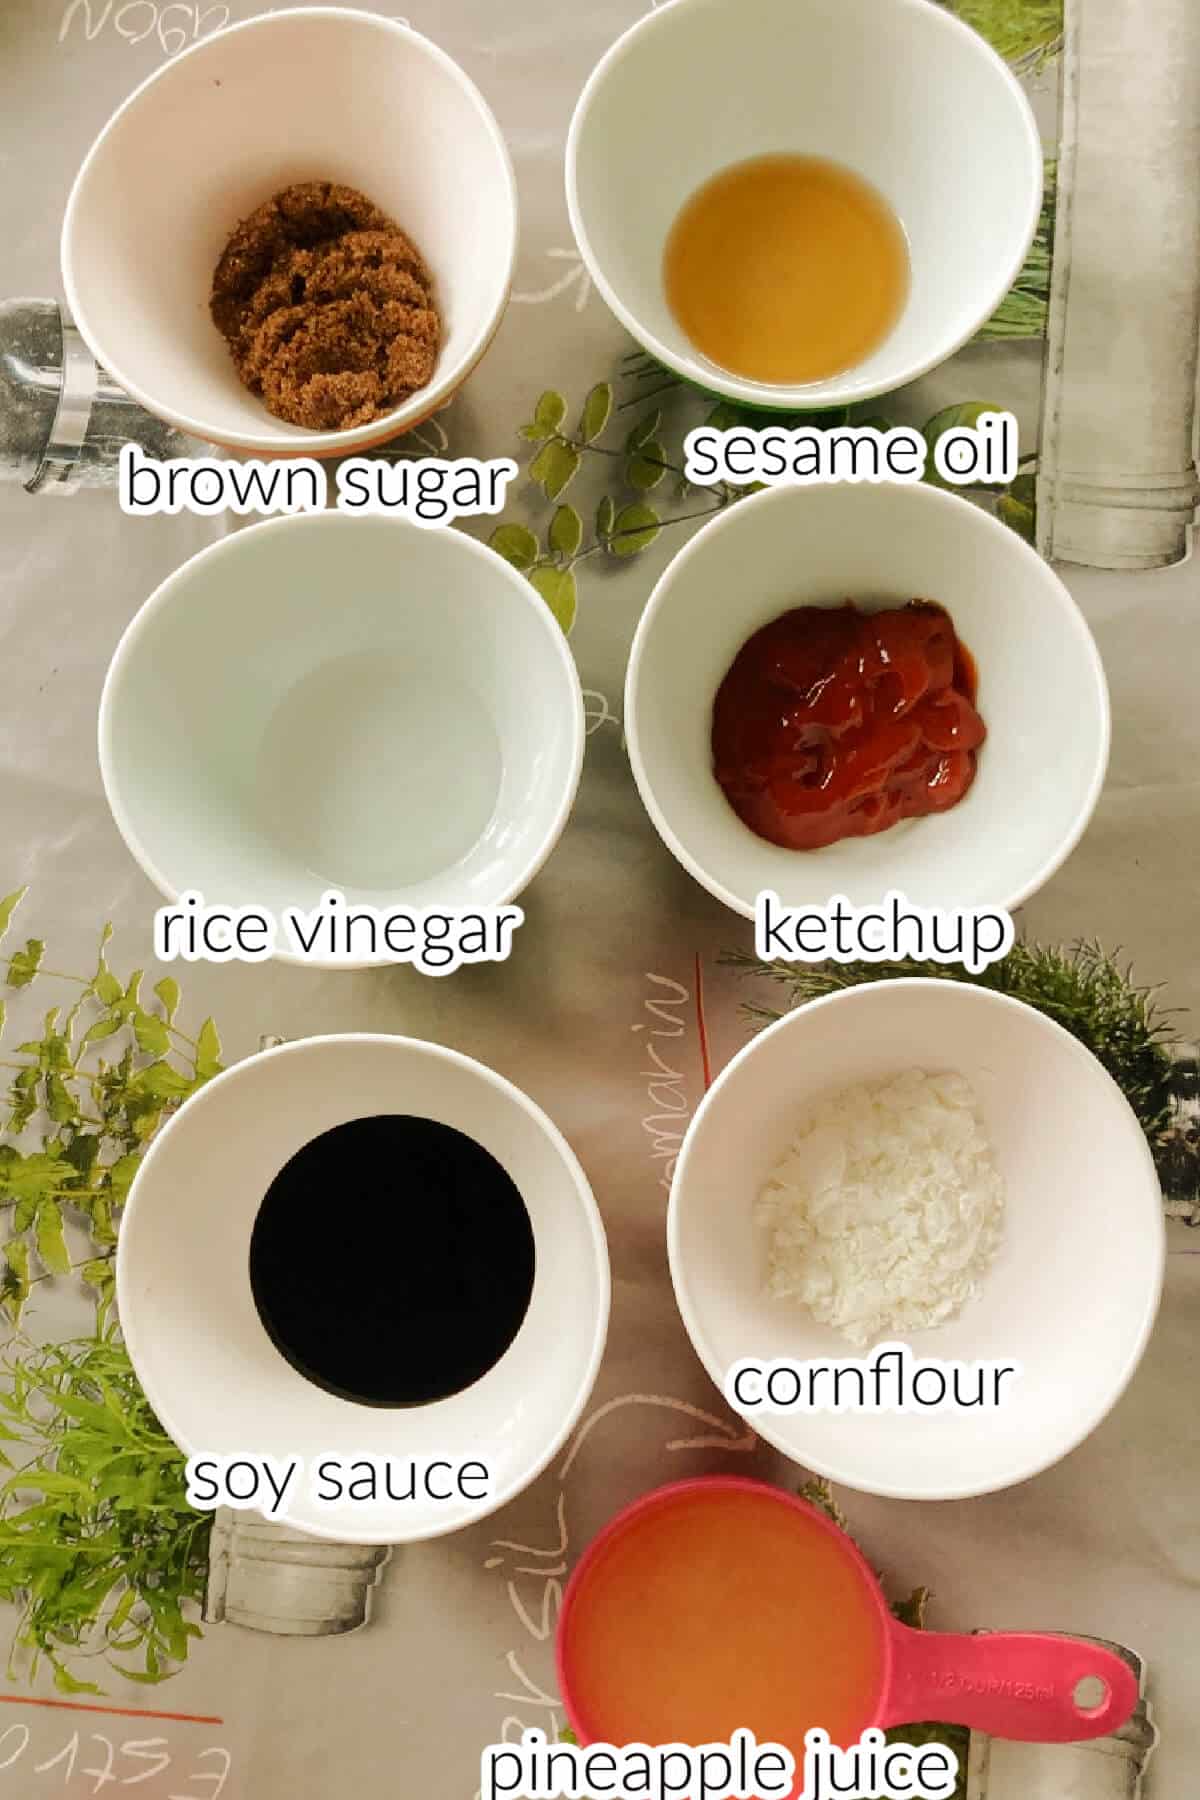 Ingredients needed to make sweet and sour sauce.